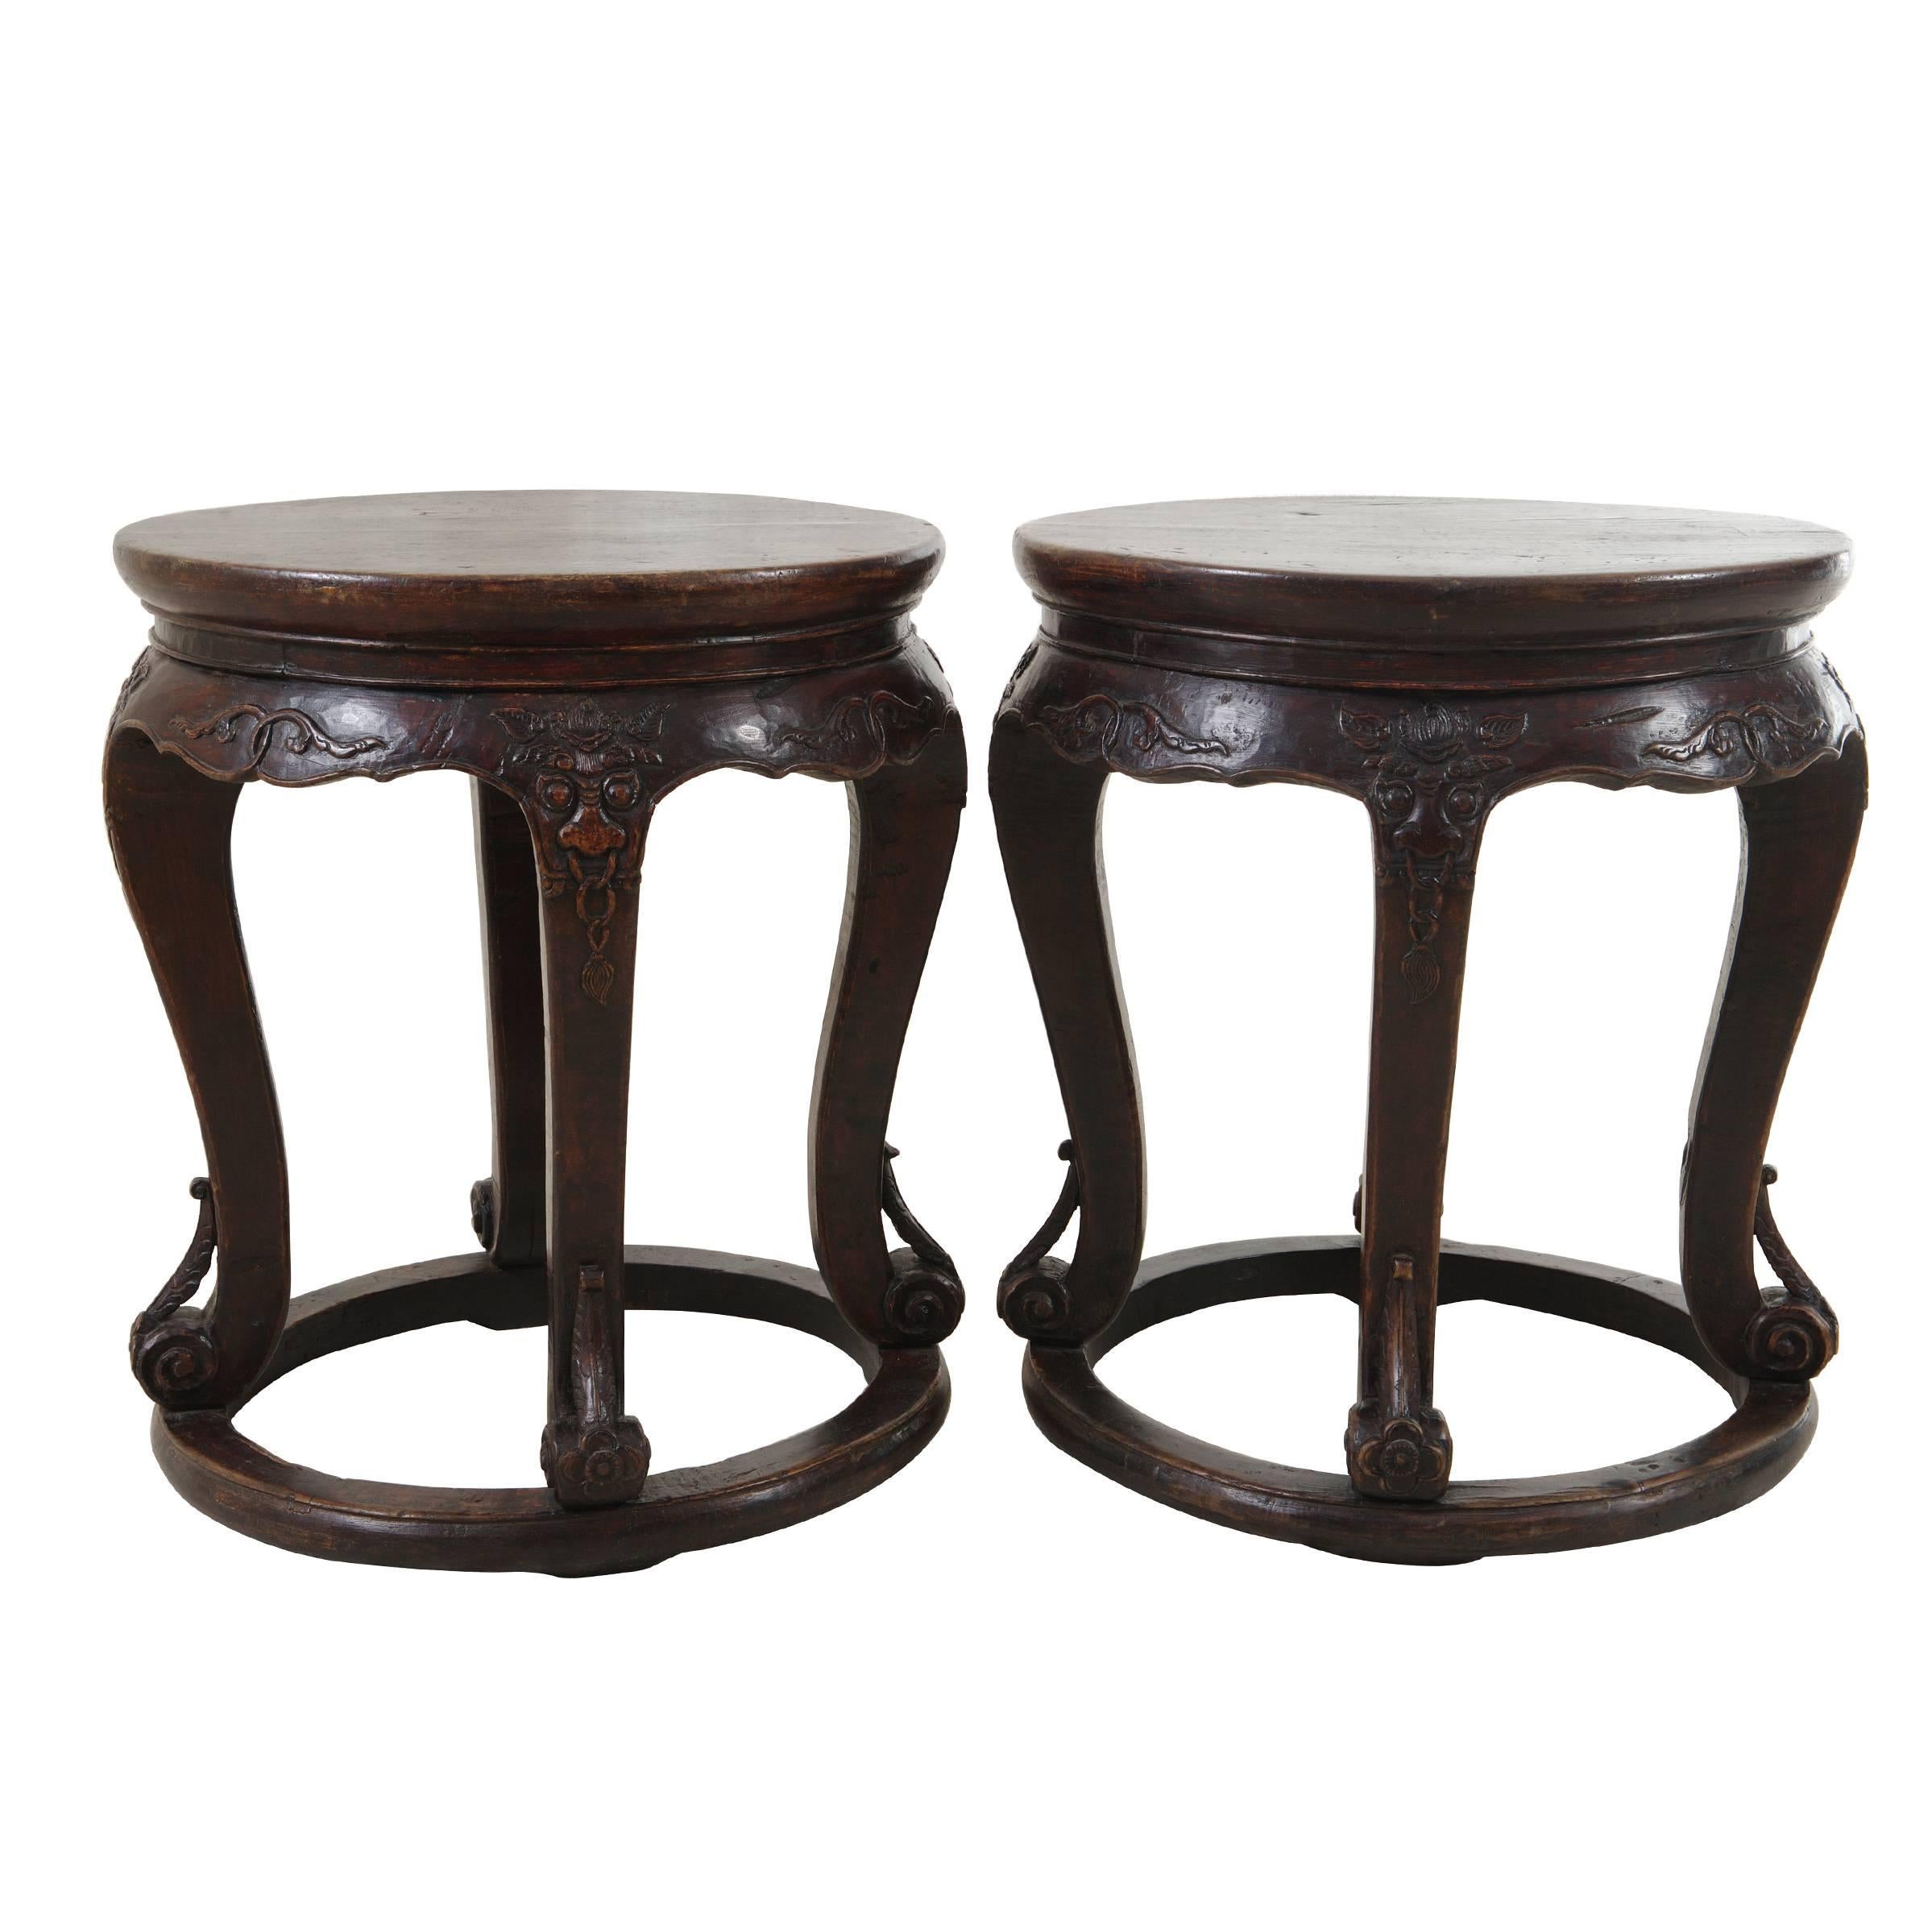 Pair of 19th Century Chinese Walnut Round Plank Top Shizi Tables